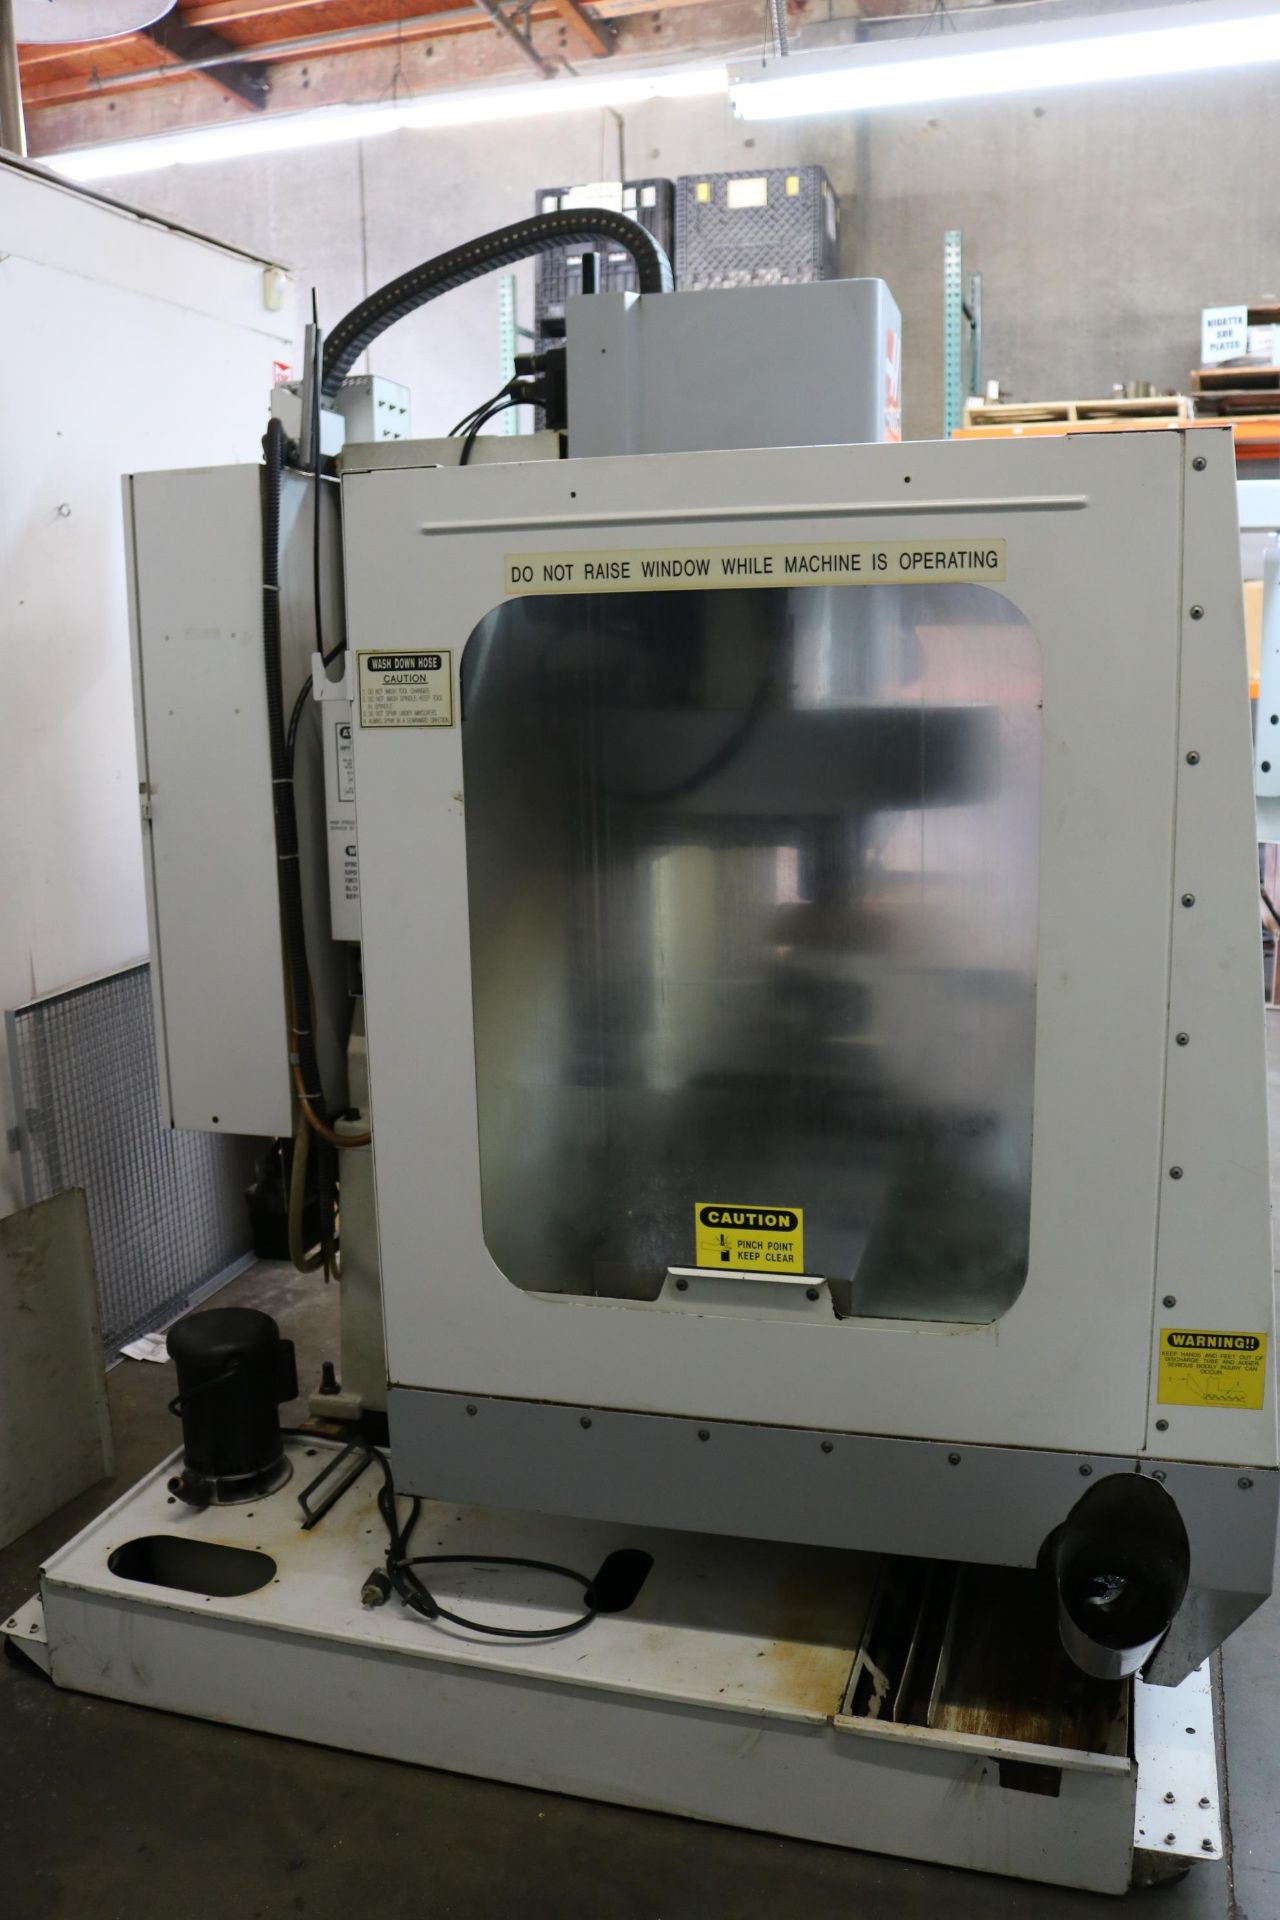 1999 HAAS VERTICAL MILL, MODEL VF-2, TRAVELS: 30" X 16" X 20", 36" X 14" TABLE, 10,000 RPM - Image 18 of 21